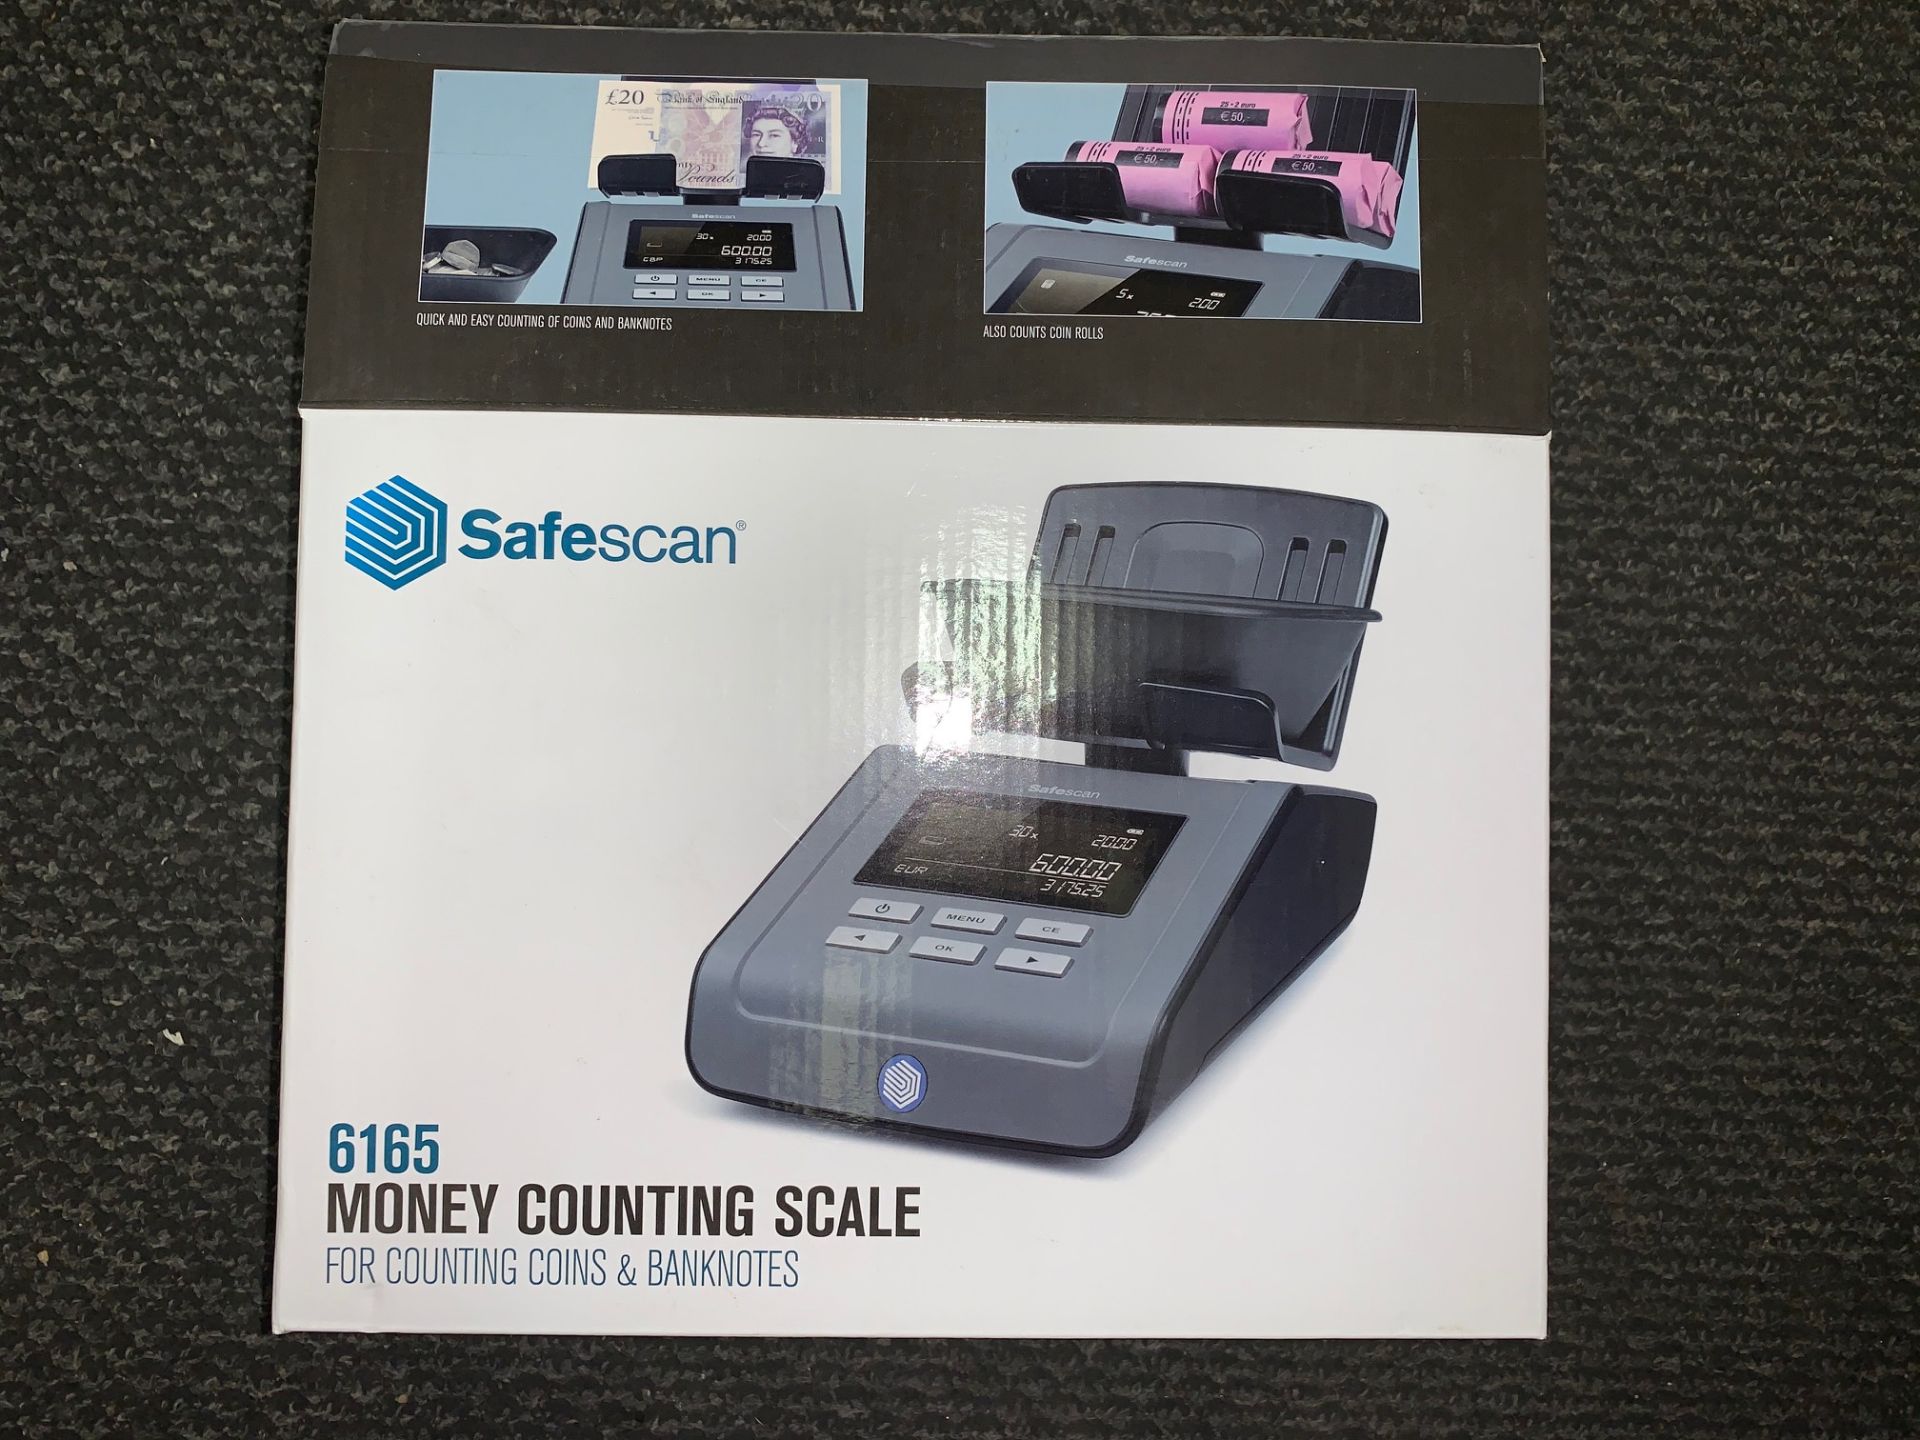 1 x Safescan 6165 Money Counting Scale